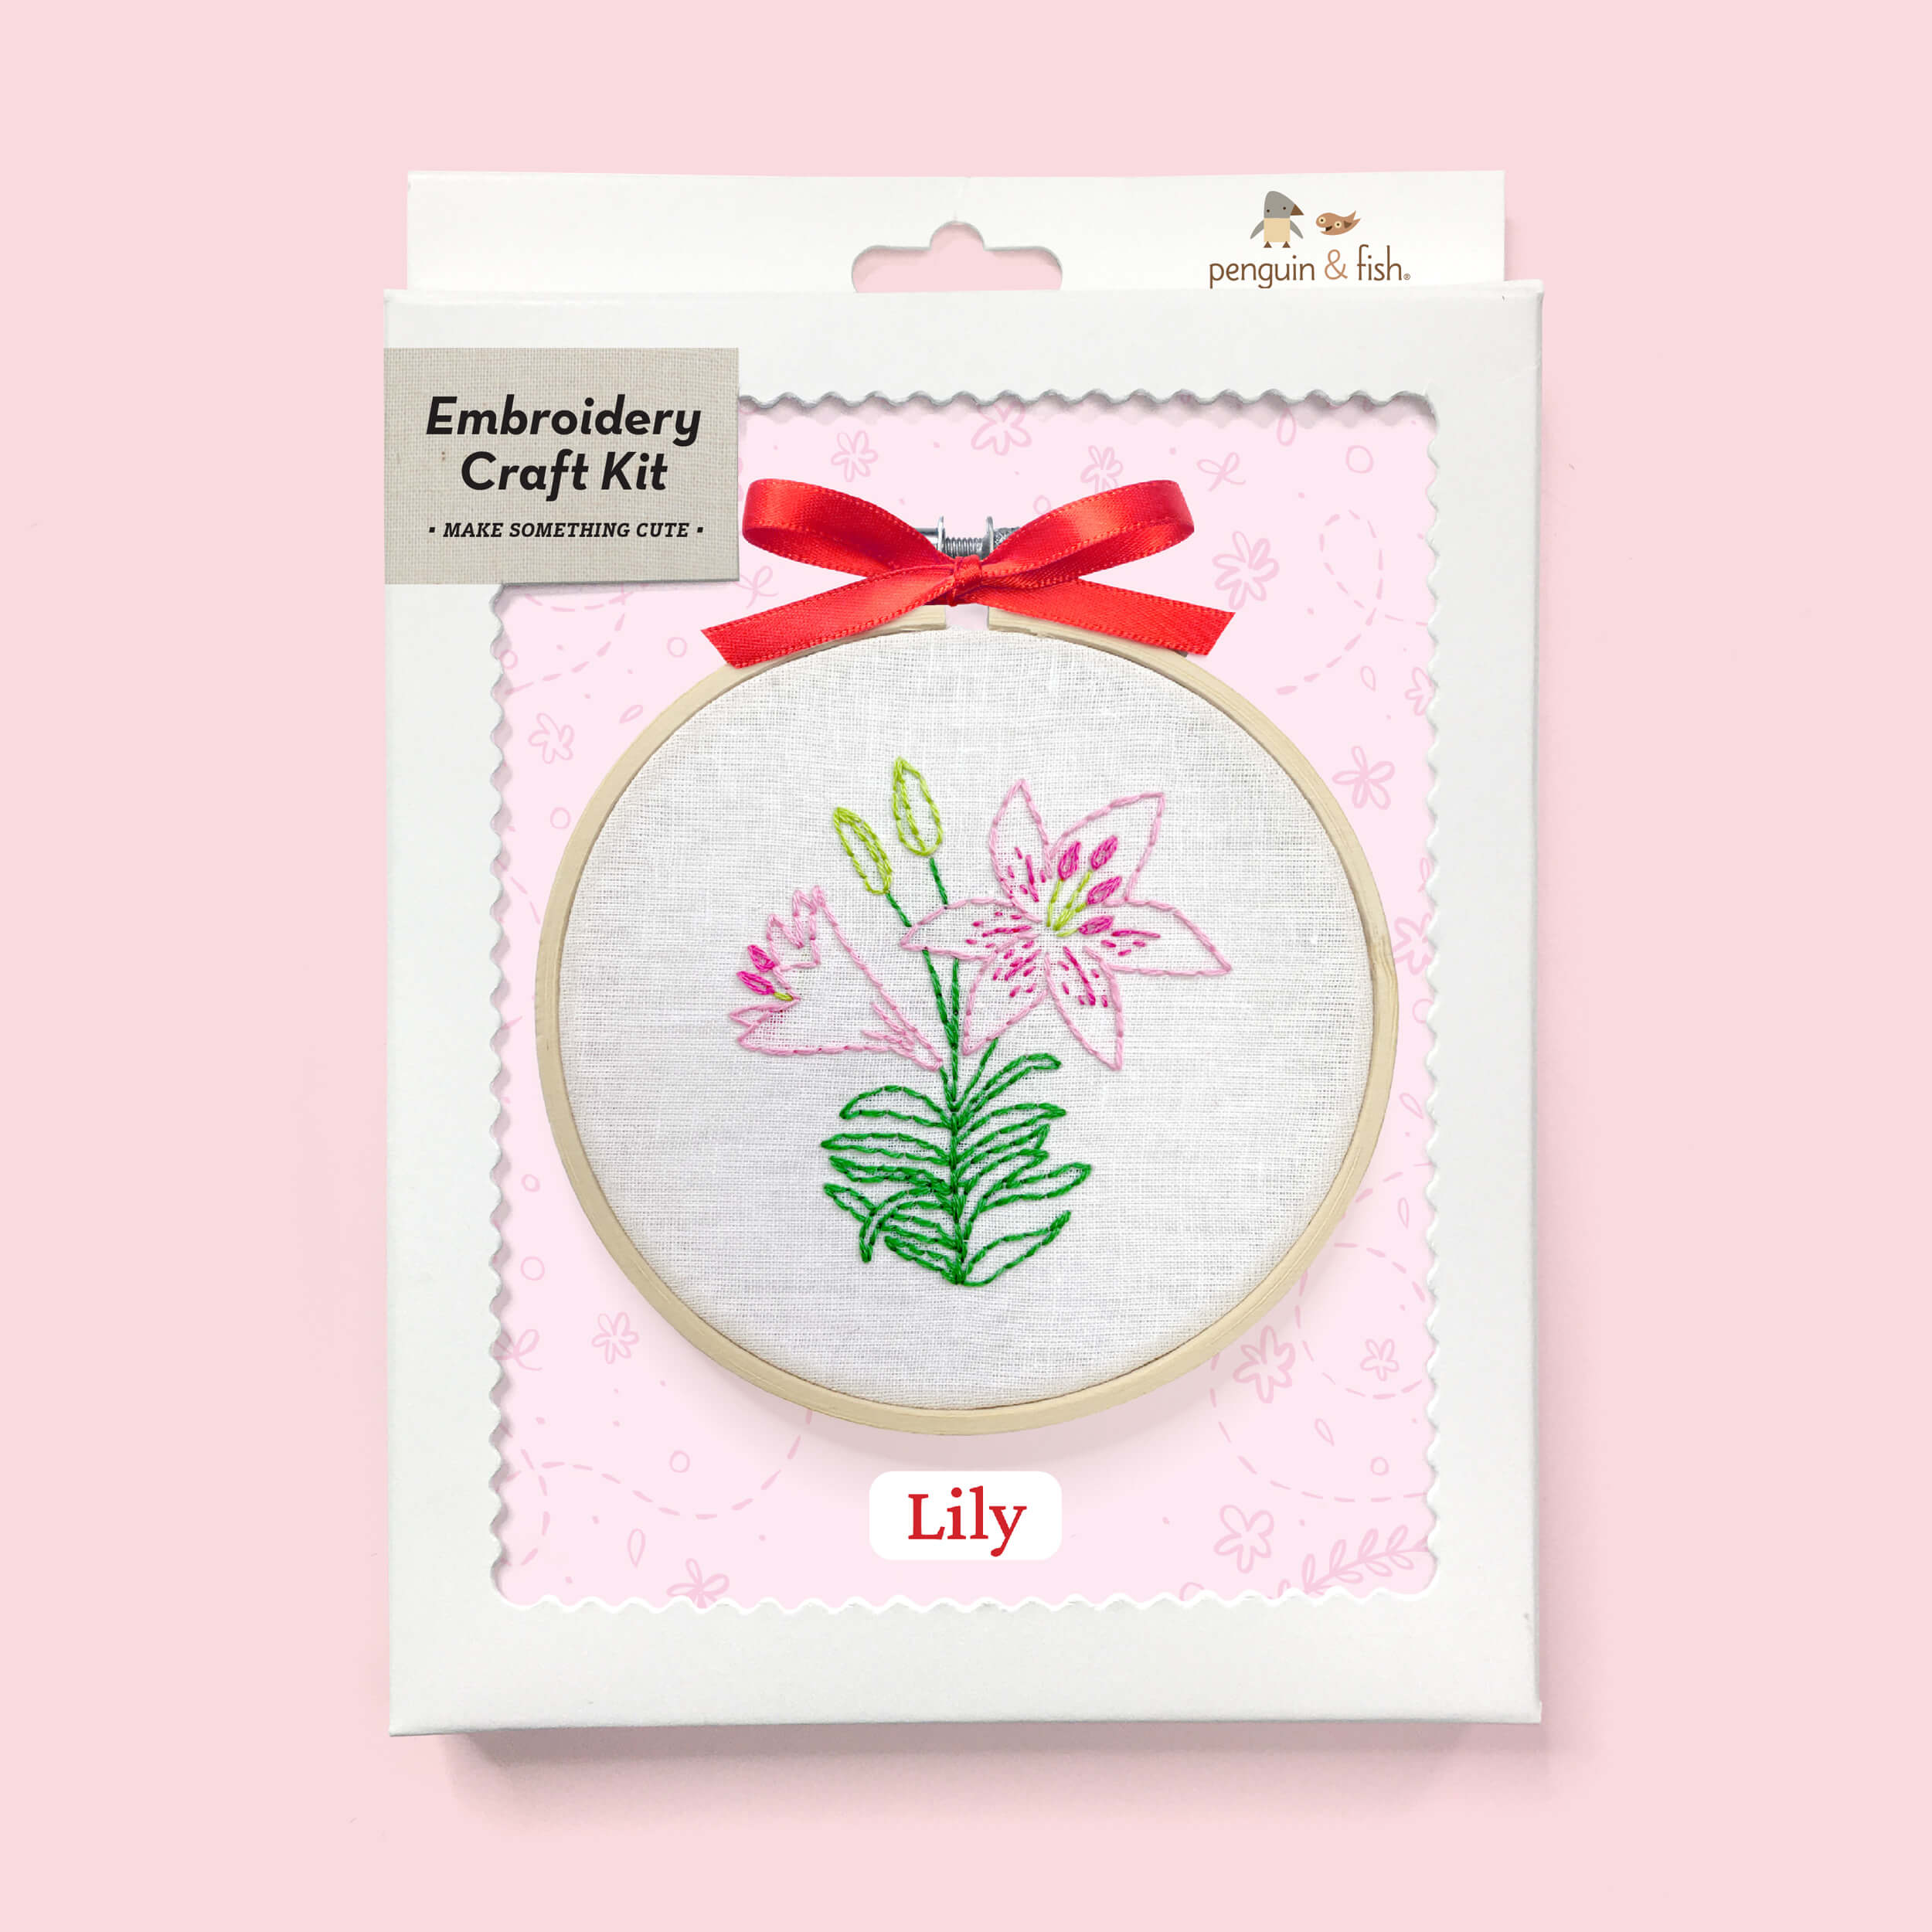 Lily embroidery kit in a box